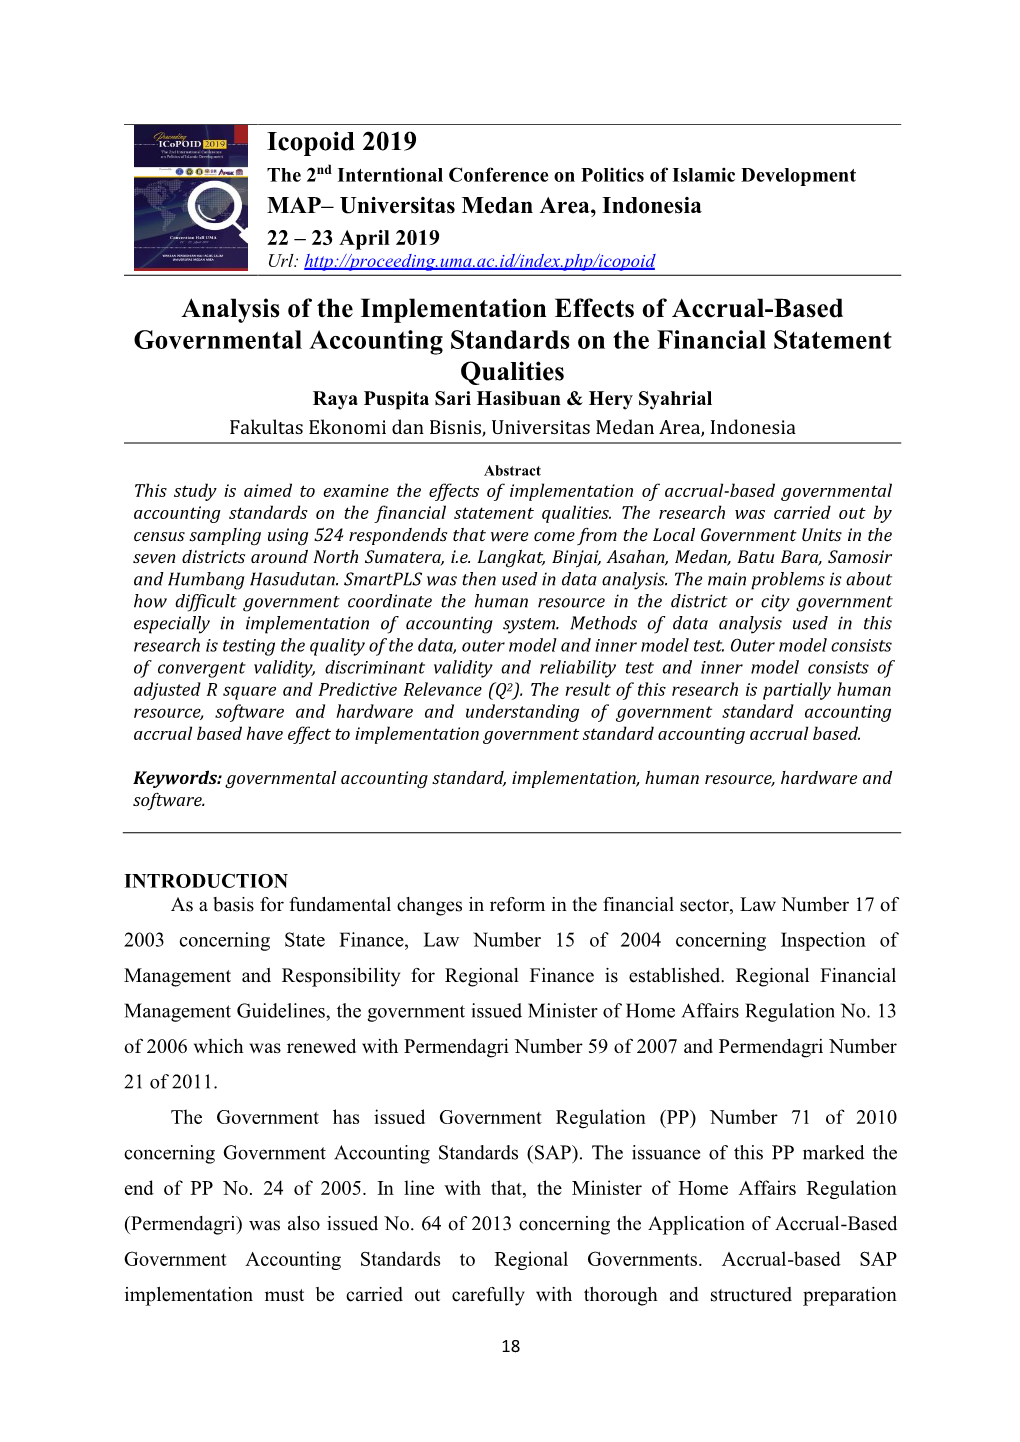 Icopoid 2019 Analysis of the Implementation Effects of Accrual-Based Governmental Accounting Standards on the Financial Statemen